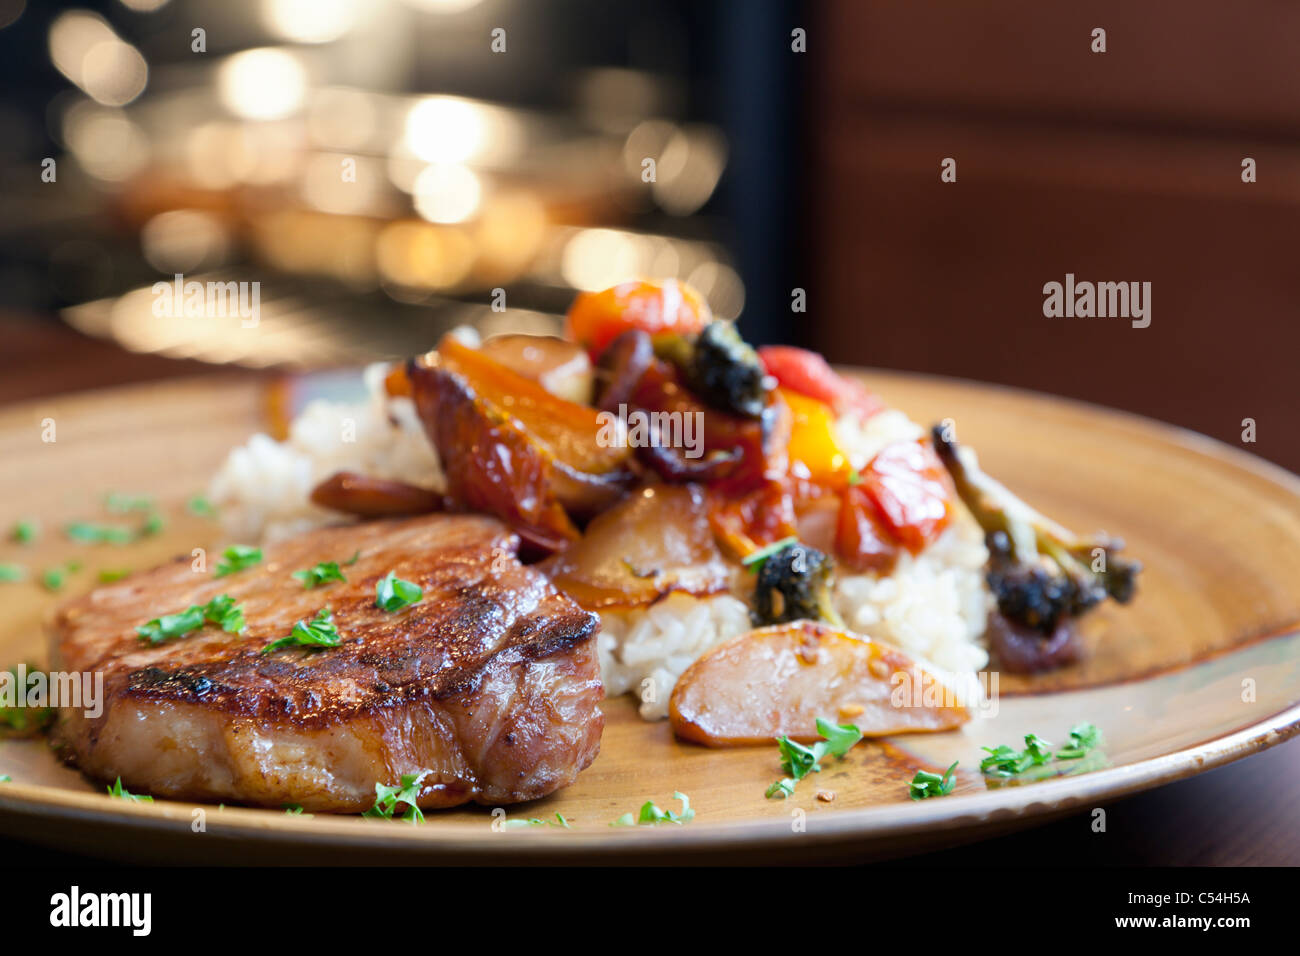 Pork, rice, and roasted vegetables Stock Photo